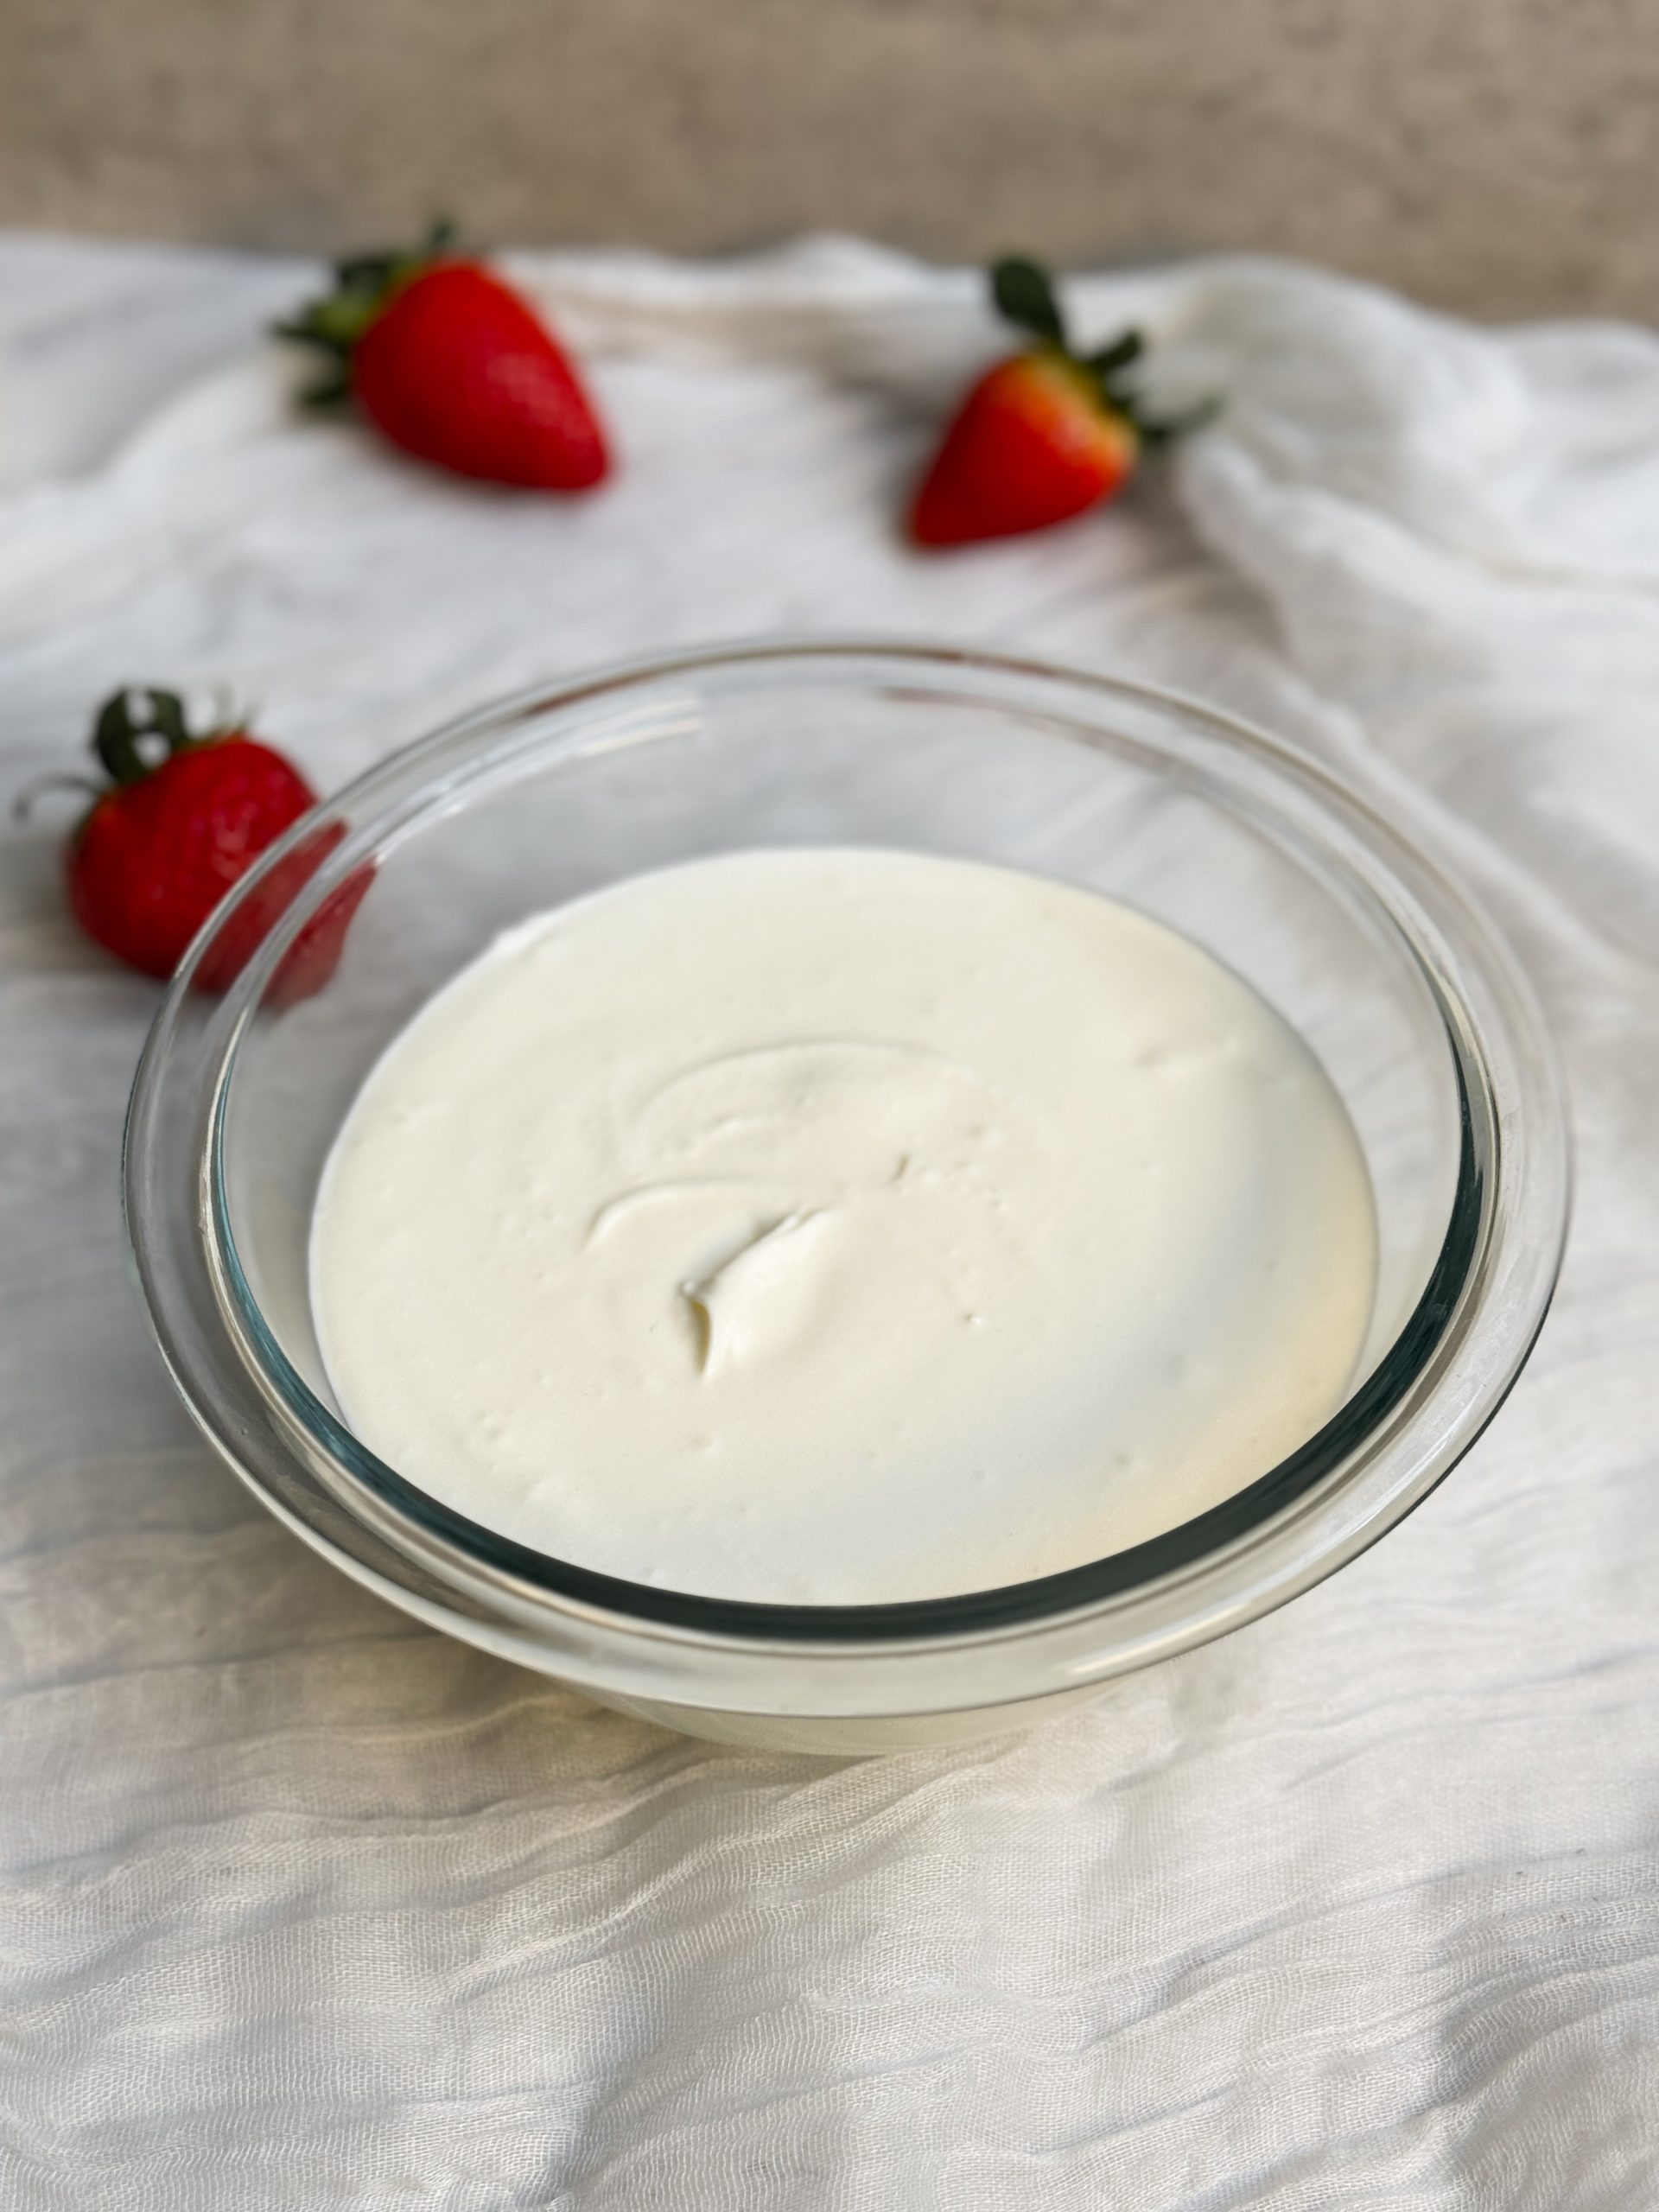 a glass bowl with sour cream. sour cream is thick and creamy. strawberries in background